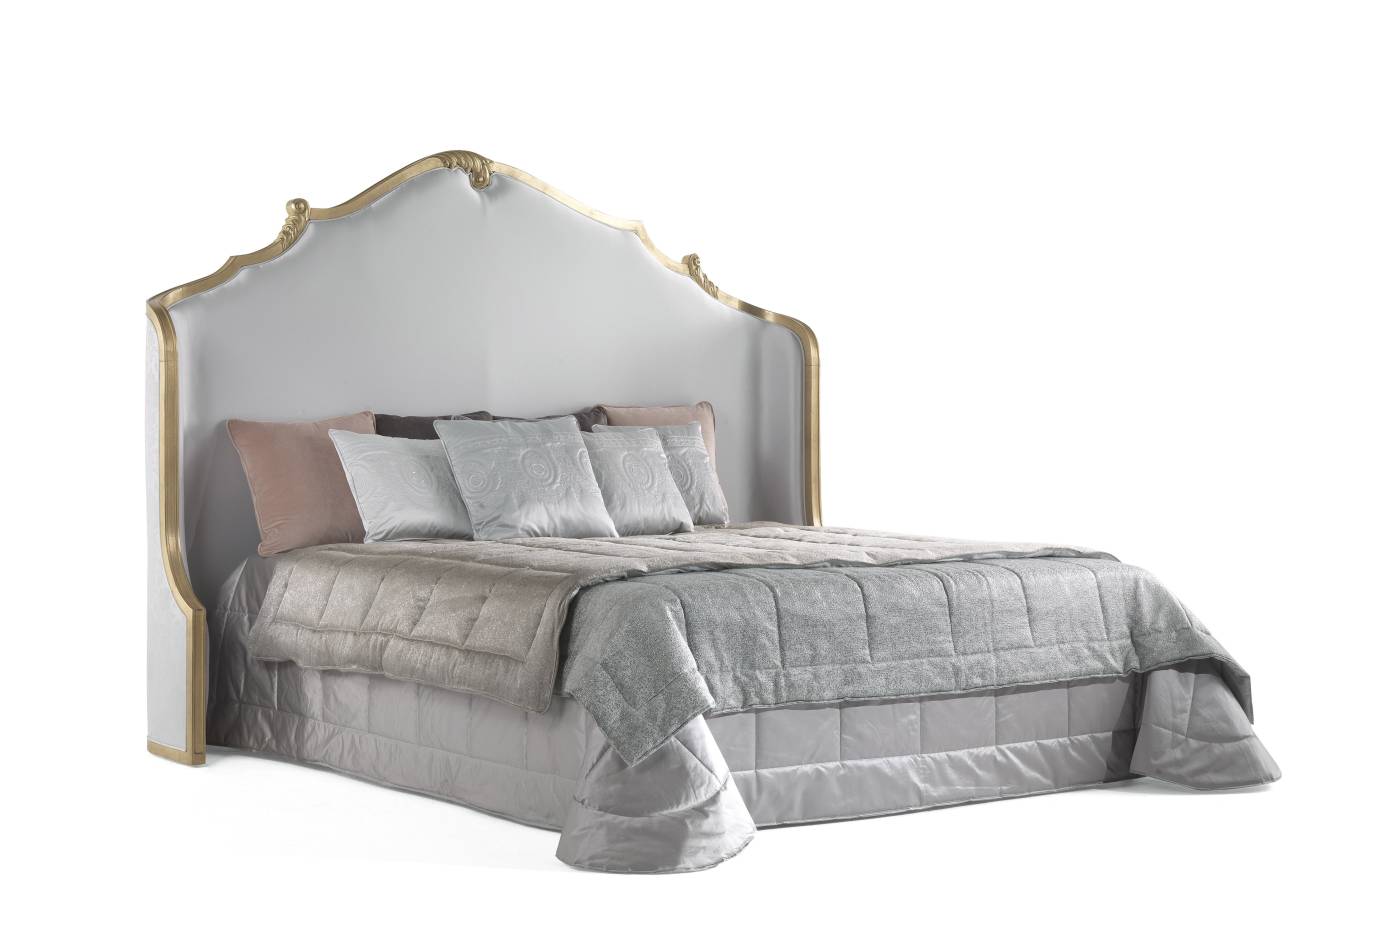 ANNECY bed - Elevate your spaces with Made in Italy luxury classic BEDS.